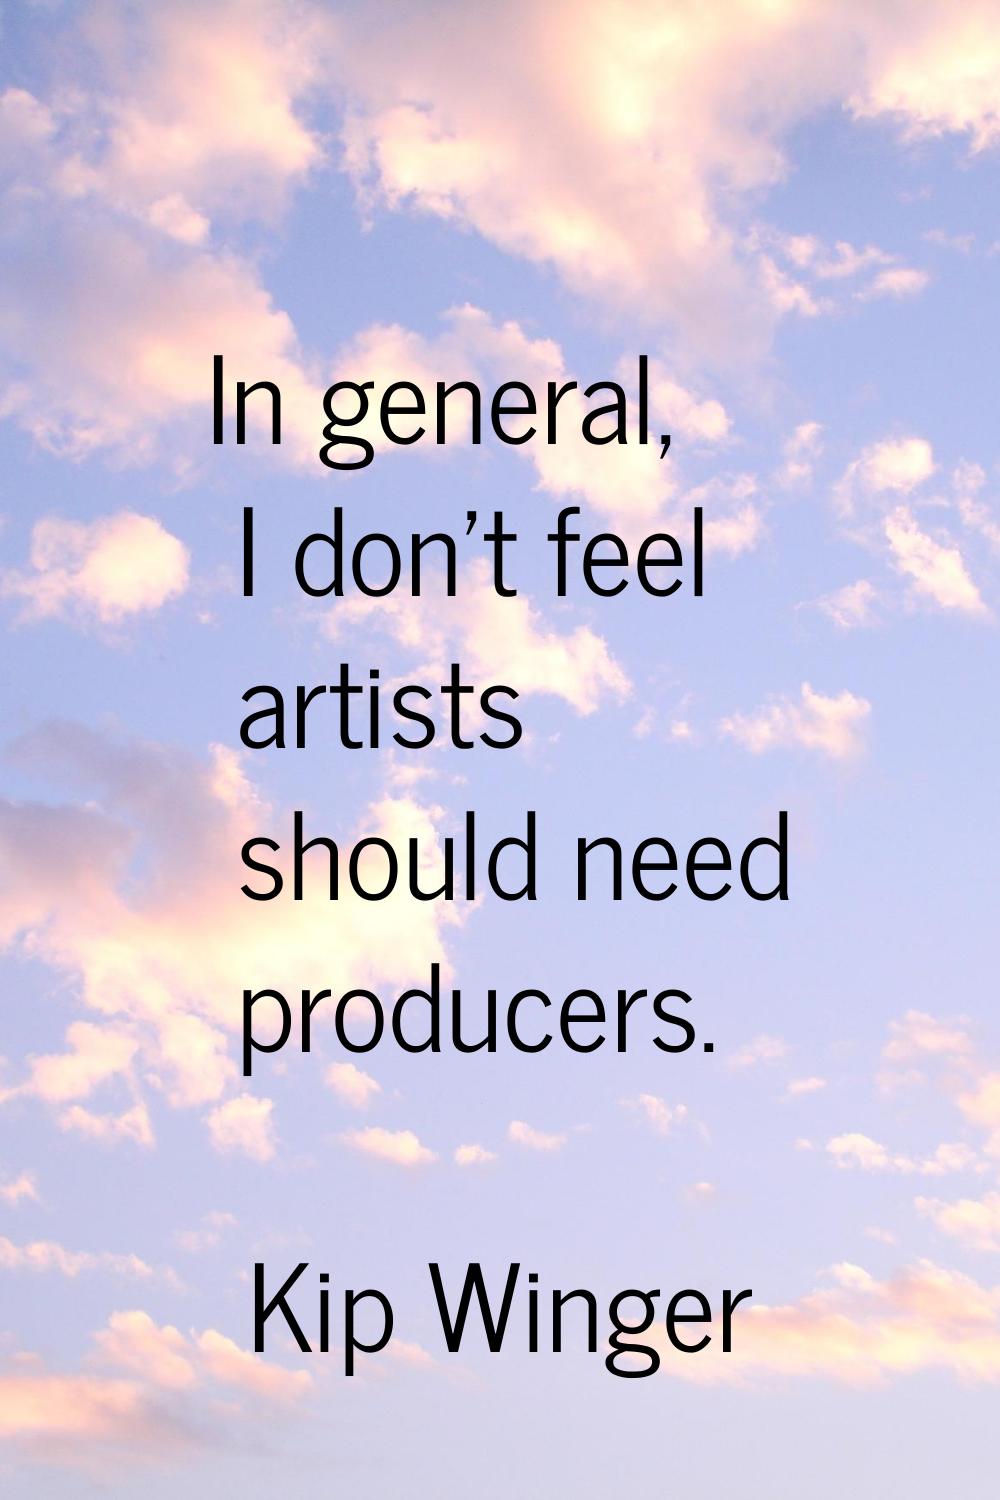 In general, I don't feel artists should need producers.